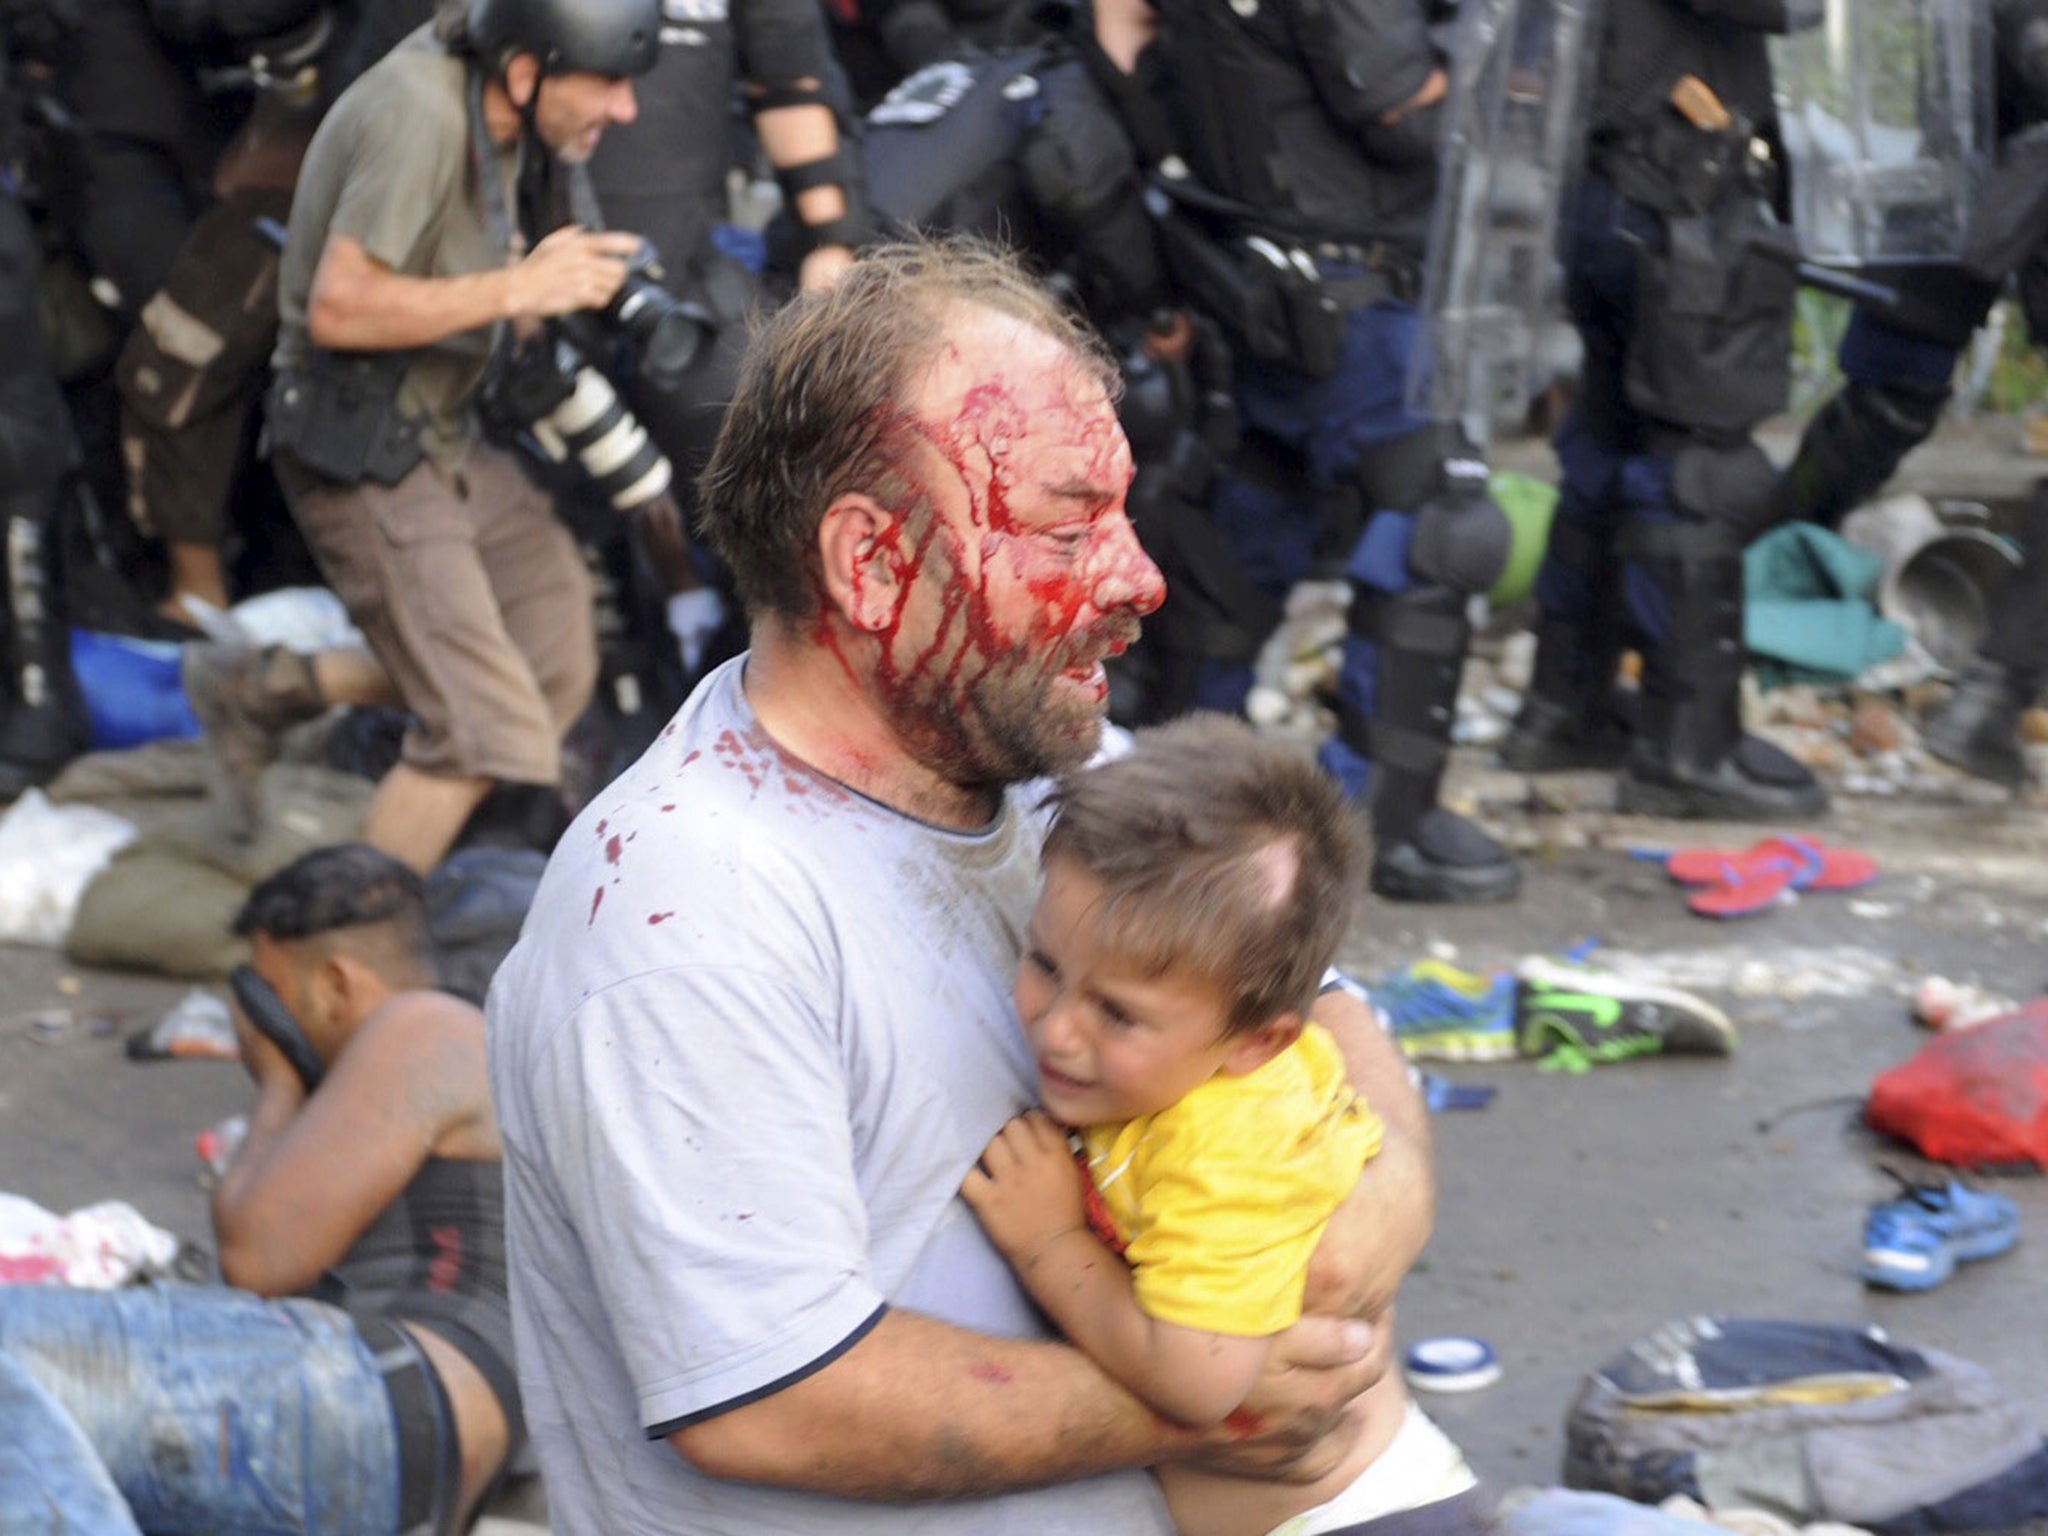 Refugees in Hungary have clashed with police